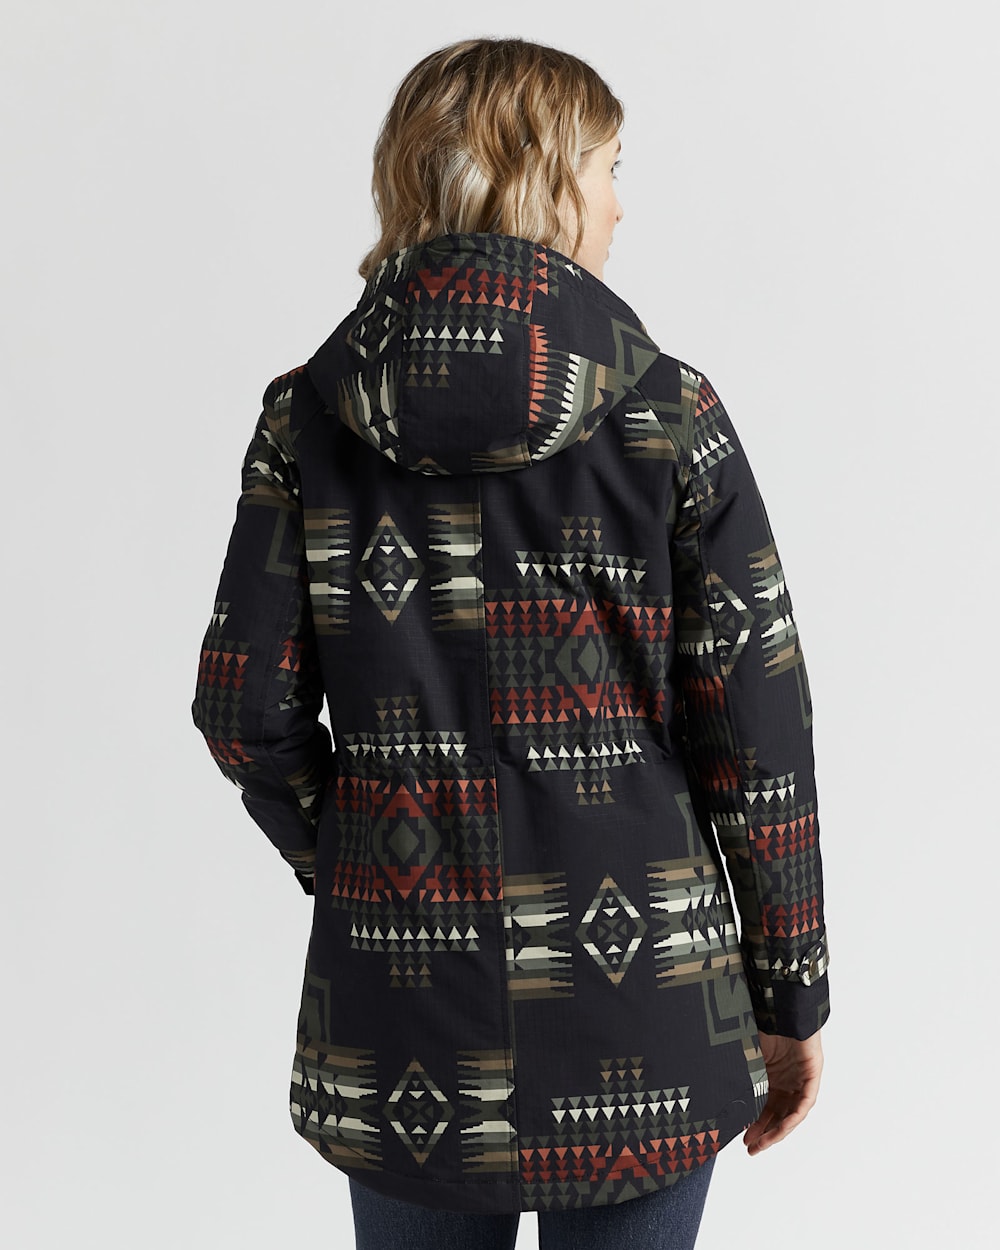 ALTERNATE VIEW OF WOMEN'S SEQUOIA INSULATED RIPSTOP ANORAK IN BLACK/OLIVE CHIEF JOSEPH image number 2